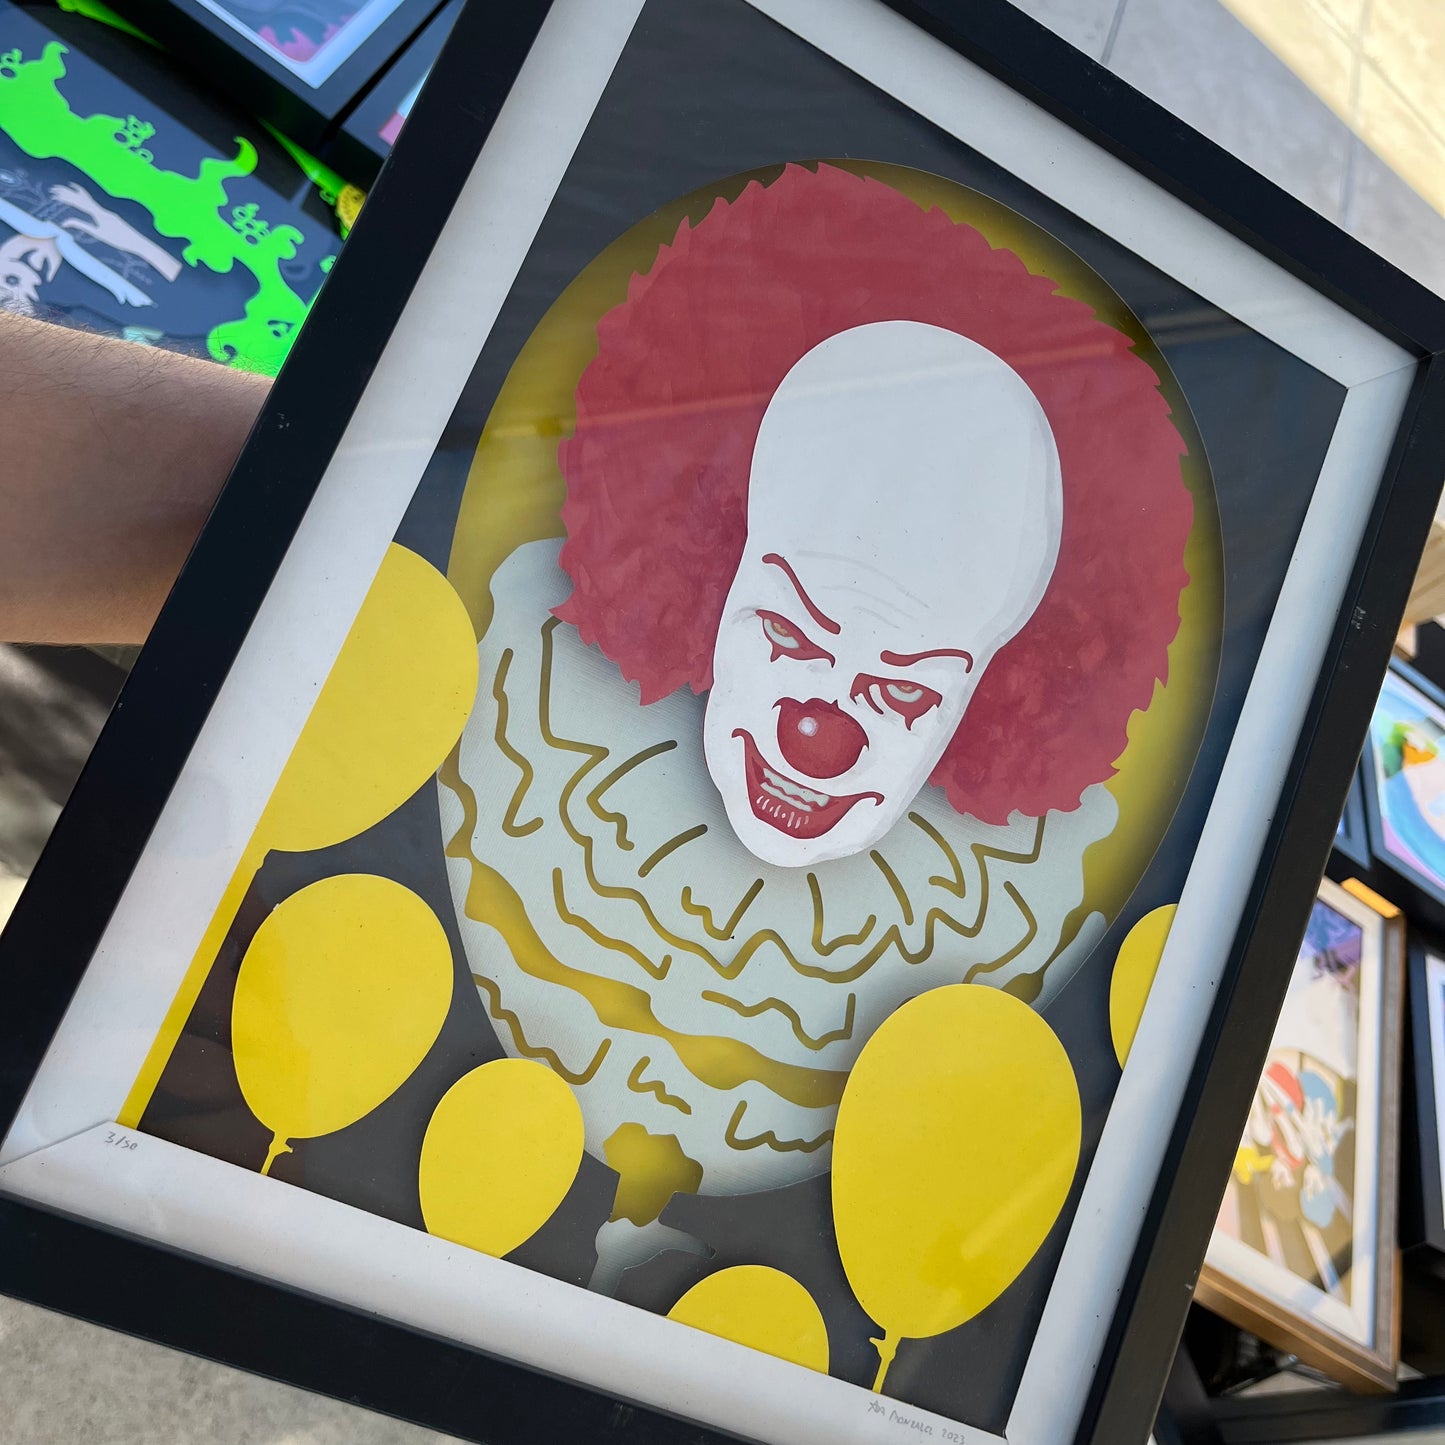 It 80s pennywise